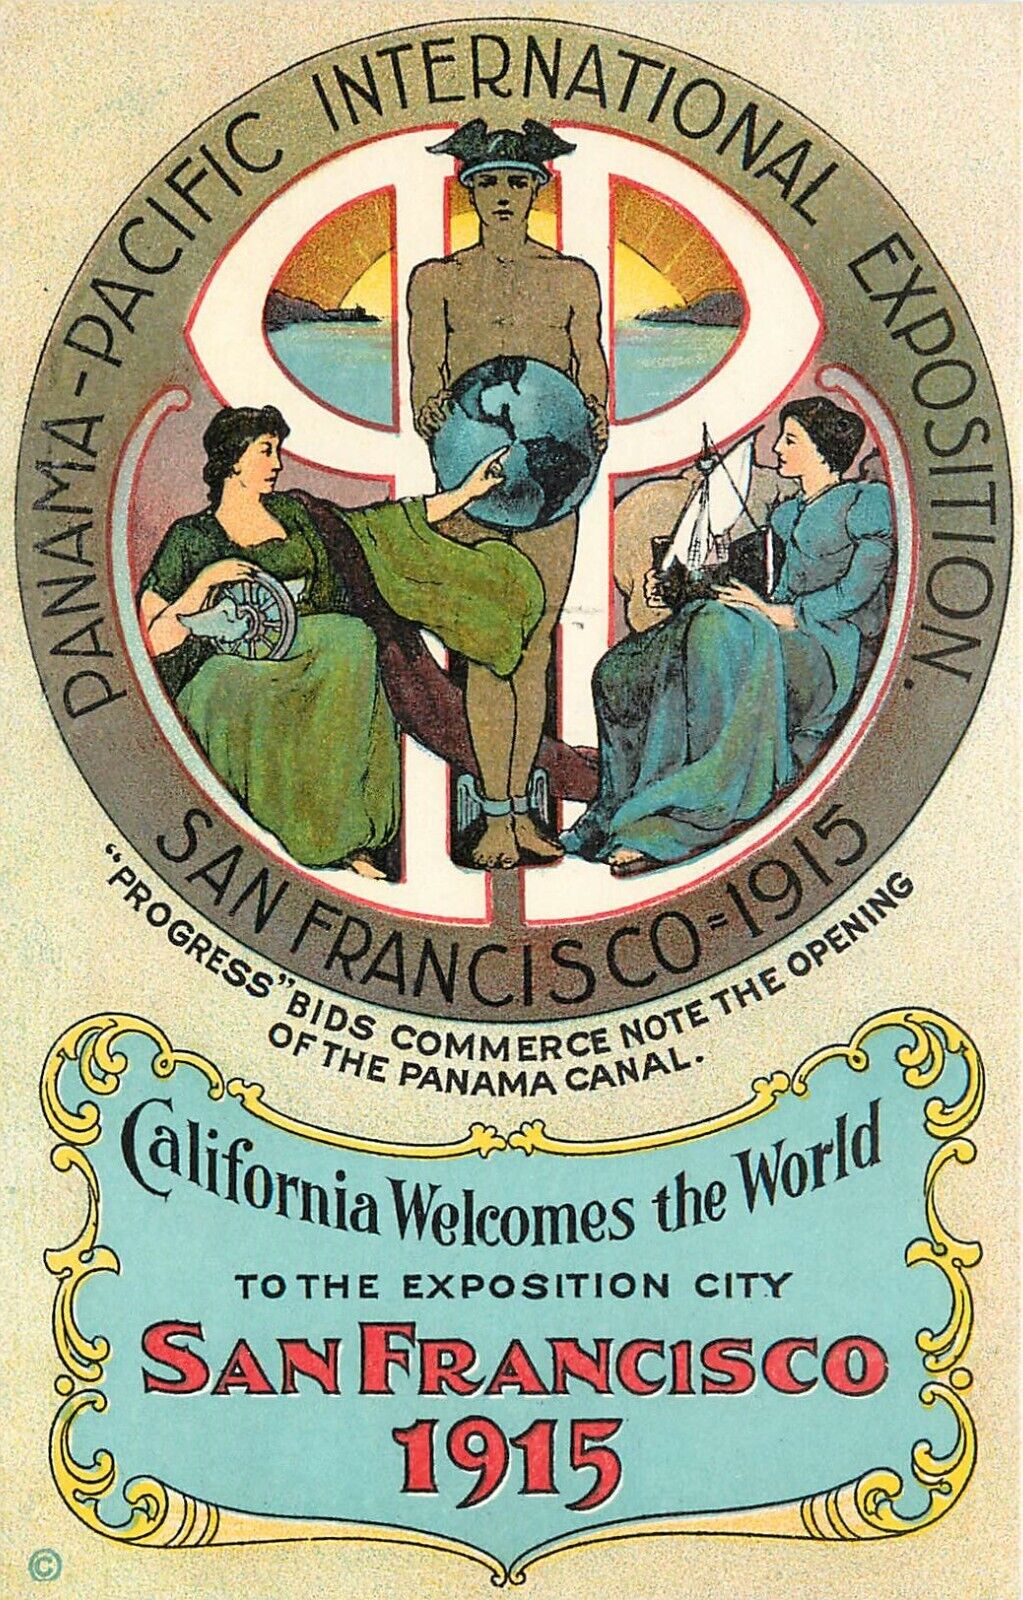 Postcard San Francisco 1915 PPIE Exposition California Welcomes The World